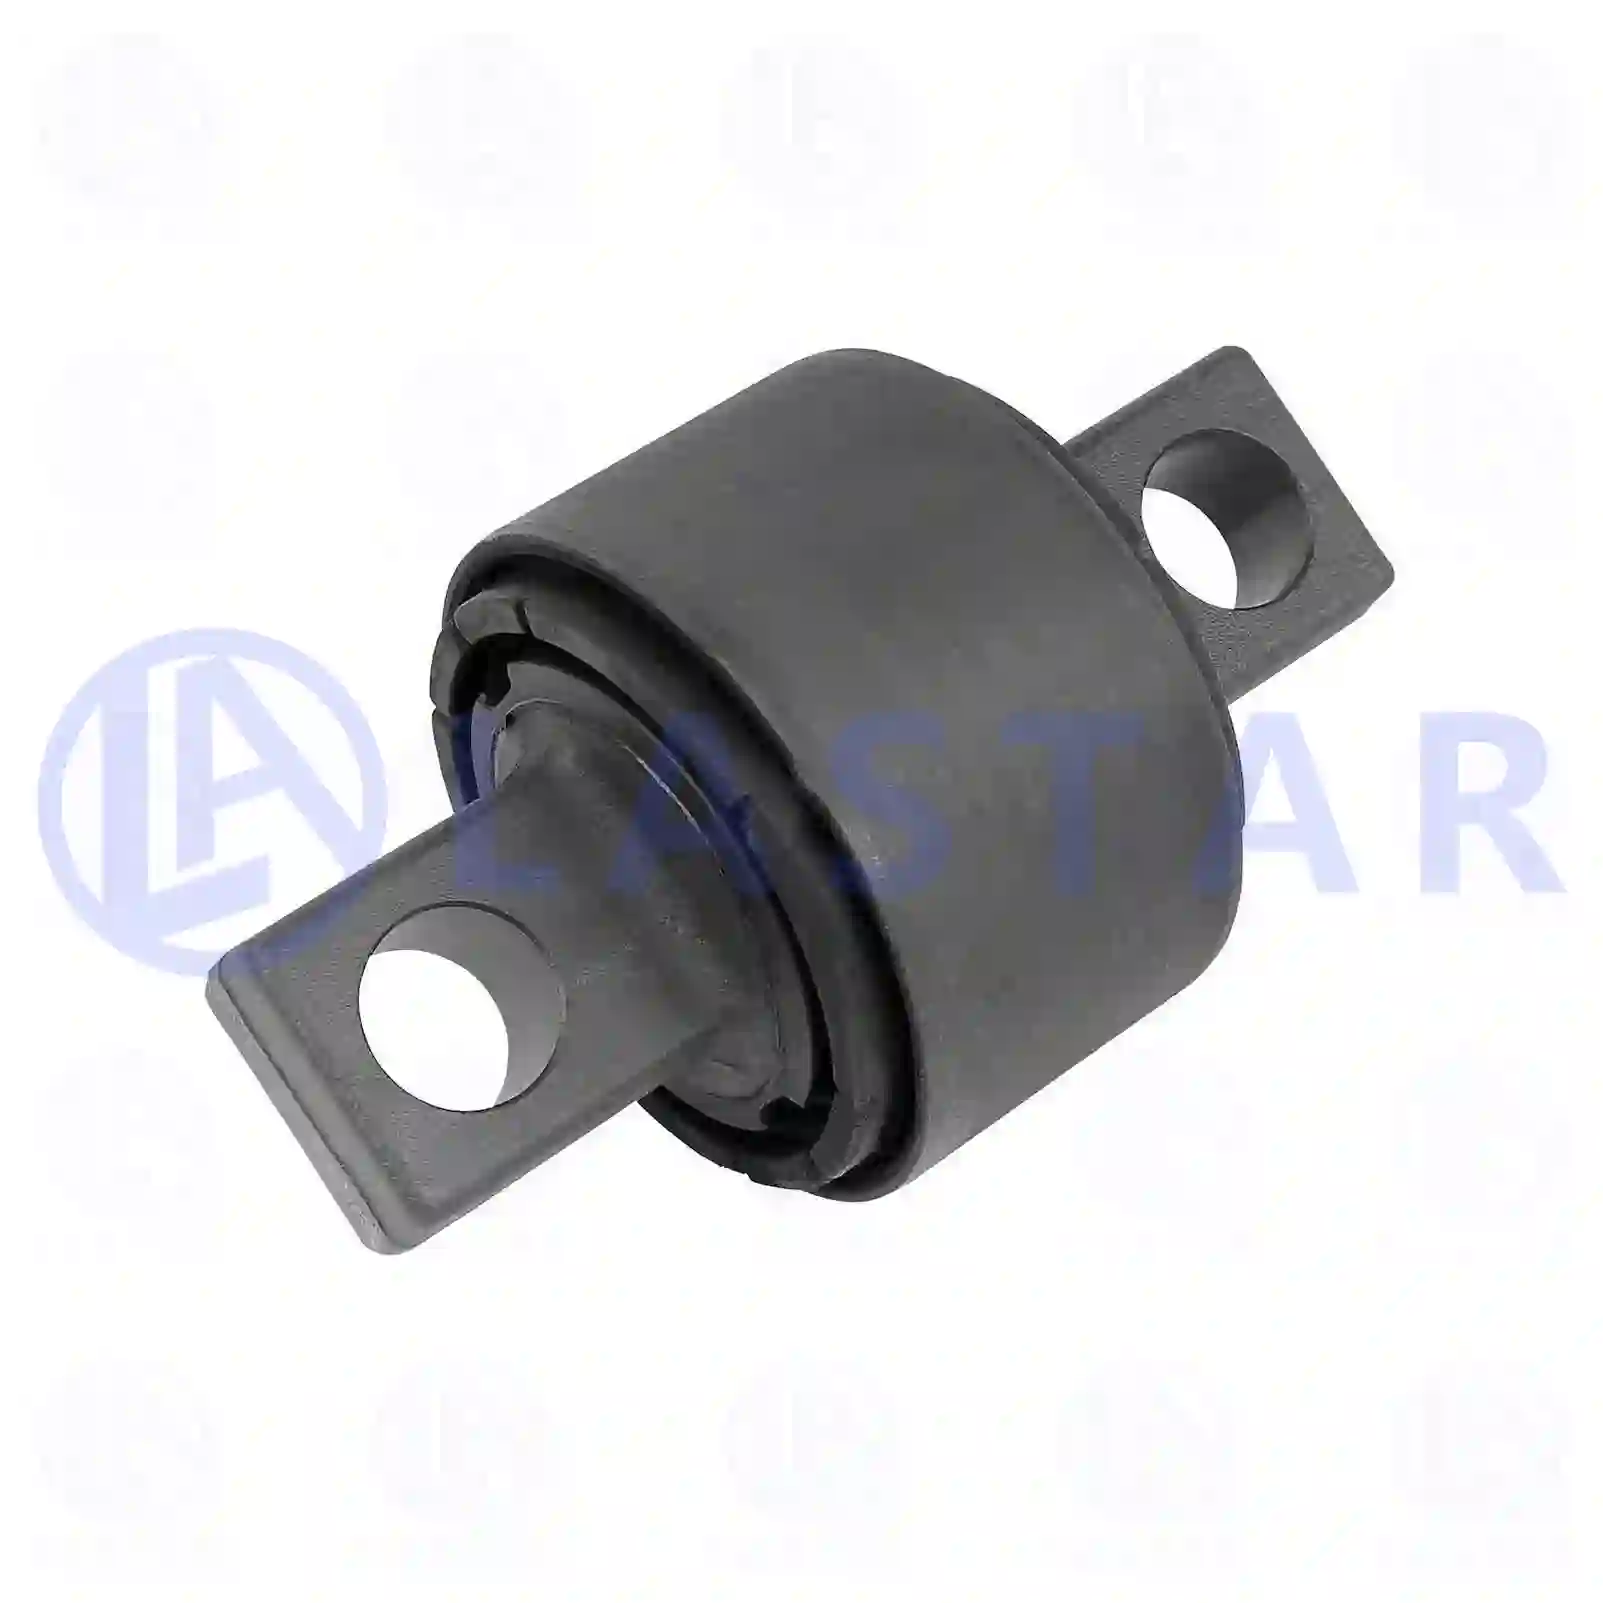 Joint bearing, stabilizer, 77730101, 1732460, , , , , ||  77730101 Lastar Spare Part | Truck Spare Parts, Auotomotive Spare Parts Joint bearing, stabilizer, 77730101, 1732460, , , , , ||  77730101 Lastar Spare Part | Truck Spare Parts, Auotomotive Spare Parts